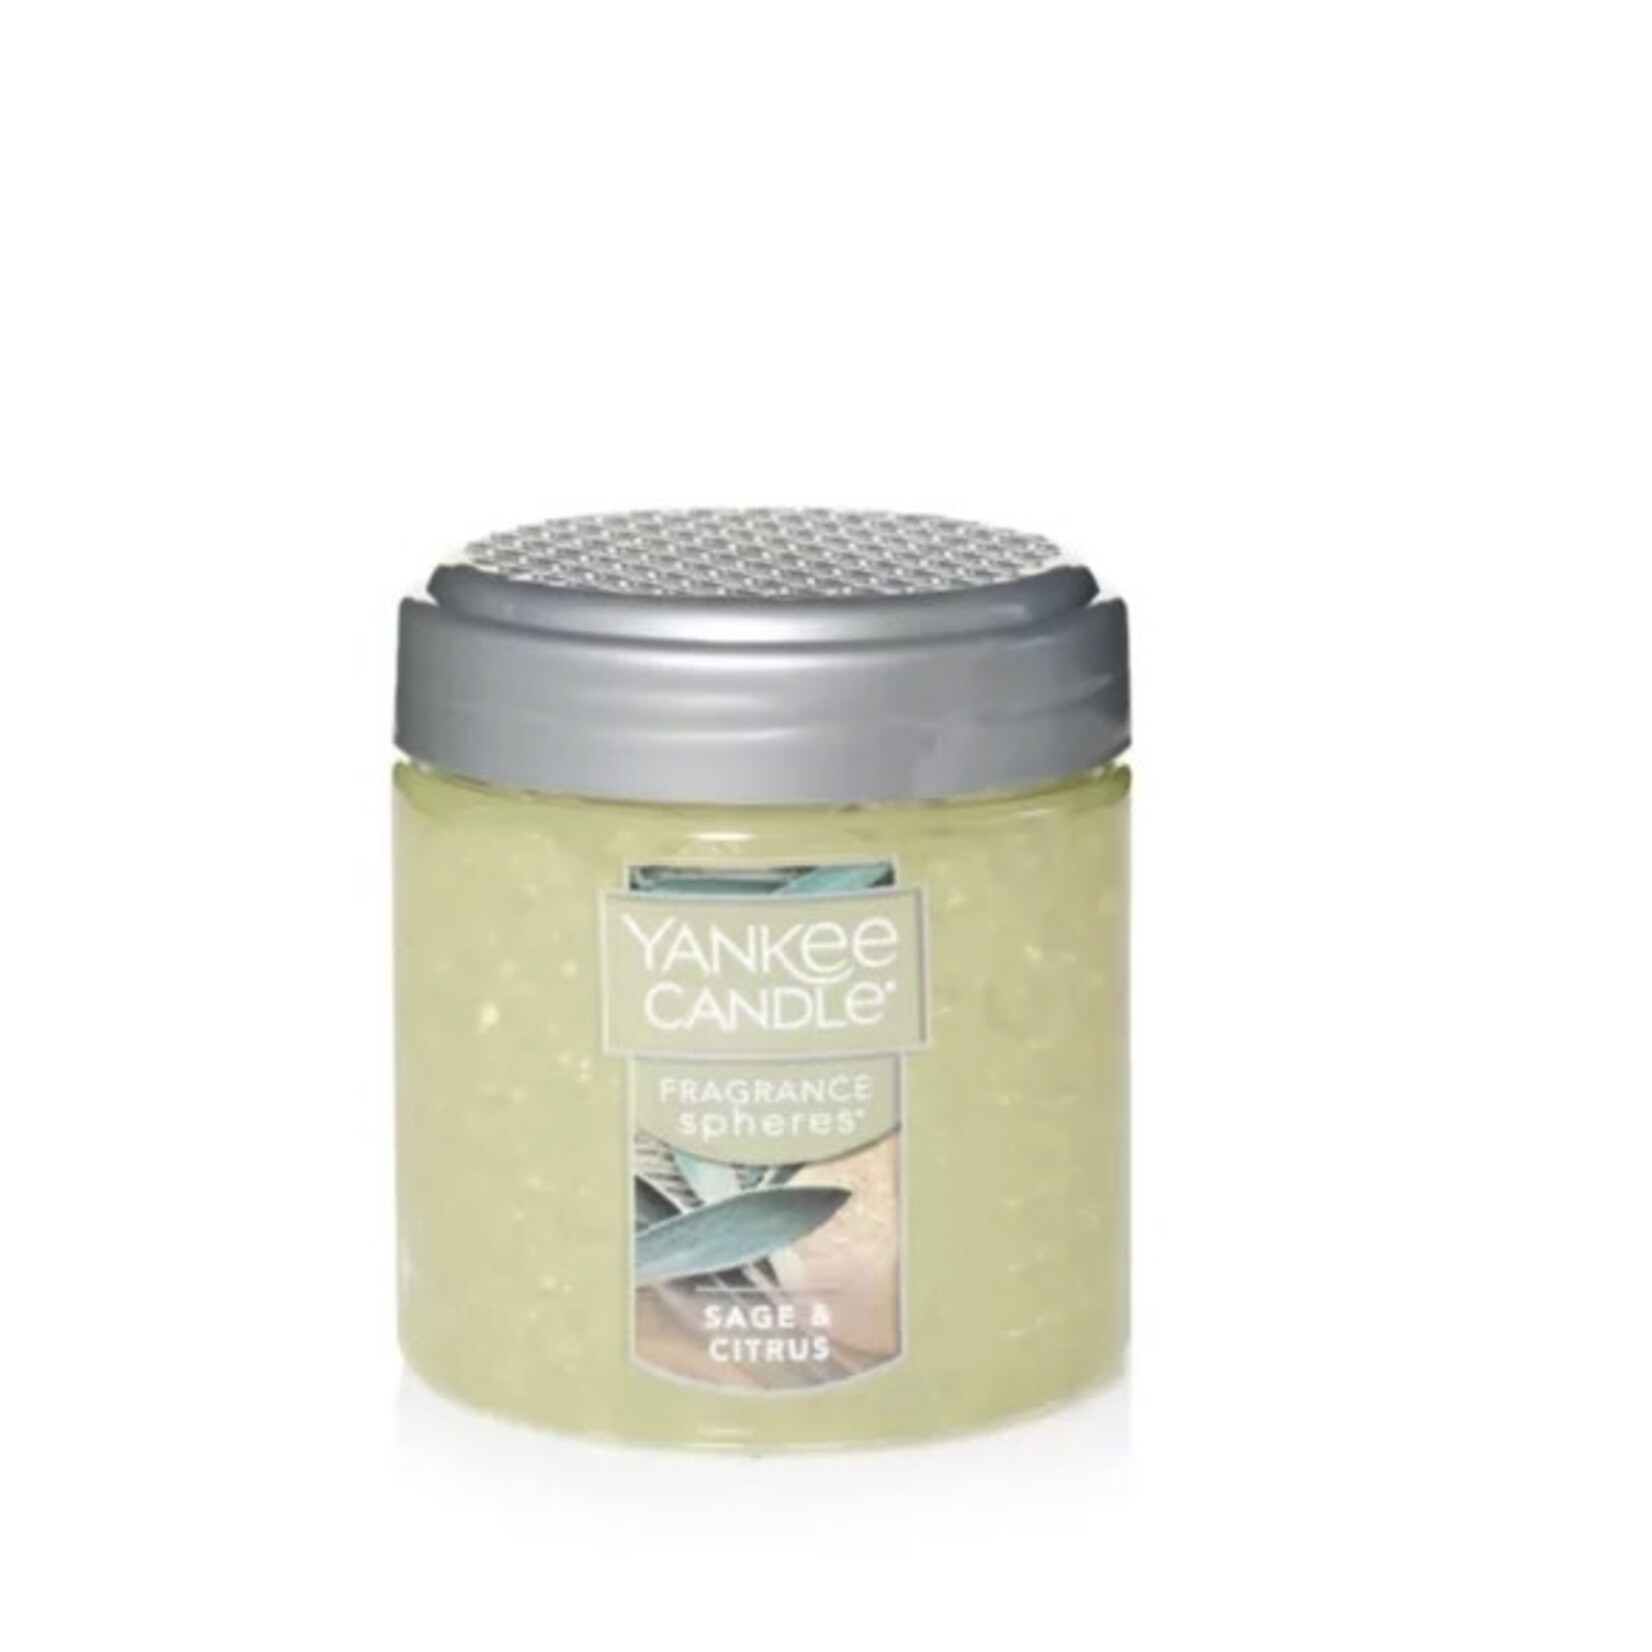 Yankee Candles Yankee Candle Fragrance Spheres Odor Neutralizing Sage & Citrus Scent Beads 6 oz